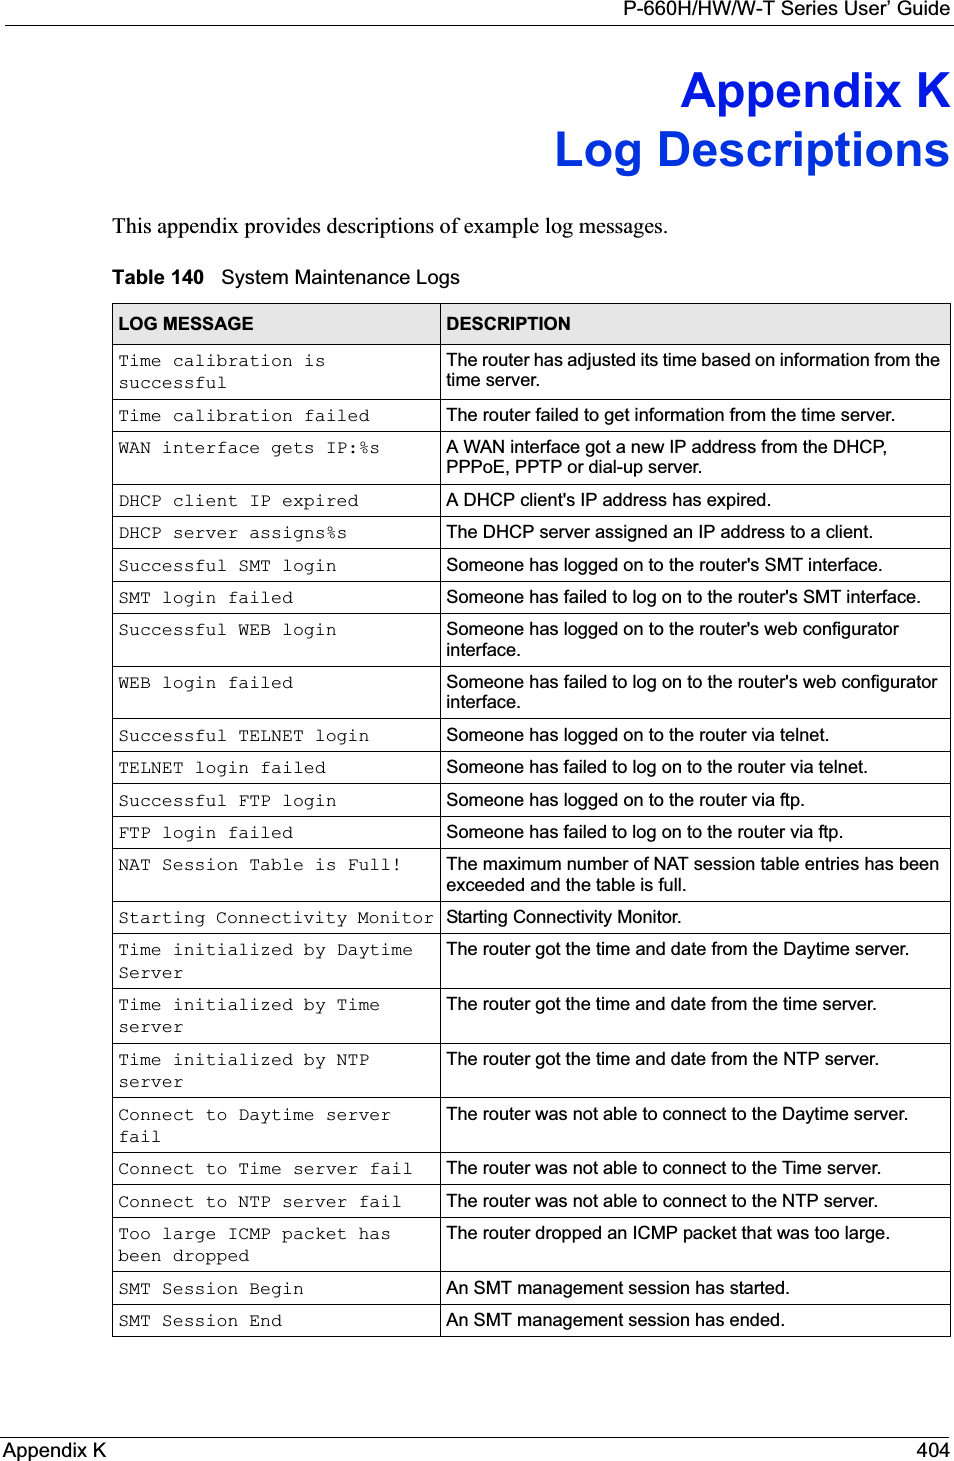 P-660H/HW/W-T Series User’ GuideAppendix K 404Appendix KLog DescriptionsThis appendix provides descriptions of example log messages. Table 140   System Maintenance LogsLOG MESSAGE DESCRIPTIONTime calibration is successfulThe router has adjusted its time based on information from the time server.Time calibration failed The router failed to get information from the time server.WAN interface gets IP:%s A WAN interface got a new IP address from the DHCP, PPPoE, PPTP or dial-up server.DHCP client IP expired A DHCP client&apos;s IP address has expired.DHCP server assigns%s The DHCP server assigned an IP address to a client.Successful SMT login Someone has logged on to the router&apos;s SMT interface.SMT login failed Someone has failed to log on to the router&apos;s SMT interface.Successful WEB login Someone has logged on to the router&apos;s web configurator interface.WEB login failed Someone has failed to log on to the router&apos;s web configurator interface.Successful TELNET login Someone has logged on to the router via telnet.TELNET login failed Someone has failed to log on to the router via telnet.Successful FTP login Someone has logged on to the router via ftp.FTP login failed Someone has failed to log on to the router via ftp.NAT Session Table is Full! The maximum number of NAT session table entries has been exceeded and the table is full.Starting Connectivity Monitor Starting Connectivity Monitor.Time initialized by Daytime ServerThe router got the time and date from the Daytime server.Time initialized by Time serverThe router got the time and date from the time server.Time initialized by NTP serverThe router got the time and date from the NTP server.Connect to Daytime server failThe router was not able to connect to the Daytime server.Connect to Time server fail The router was not able to connect to the Time server.Connect to NTP server fail The router was not able to connect to the NTP server.Too large ICMP packet has been droppedThe router dropped an ICMP packet that was too large.SMT Session Begin An SMT management session has started.SMT Session End An SMT management session has ended.